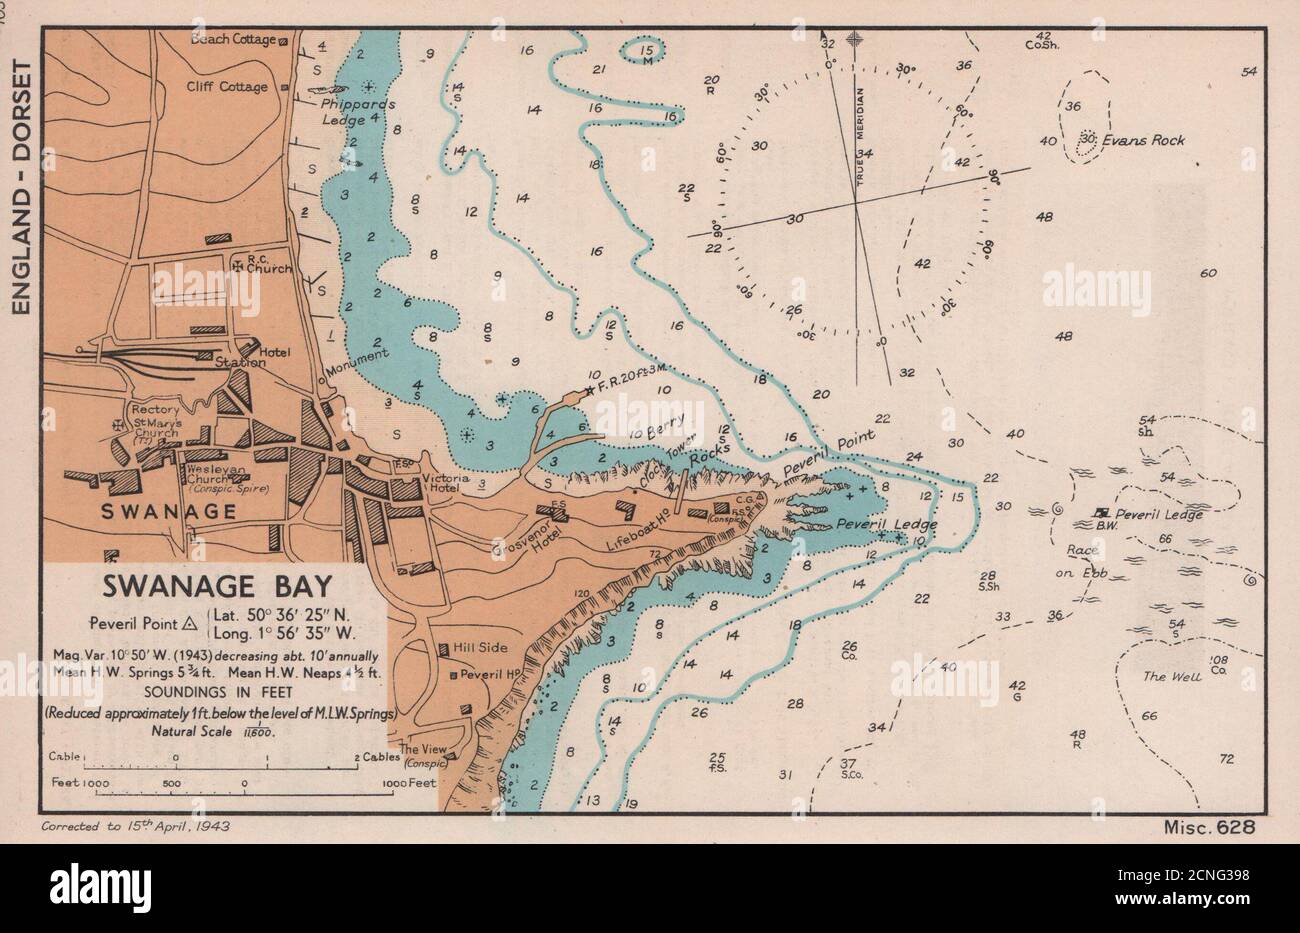 Swanage Bay town plan & sea coast chart. Dorset. ADMIRALTY 1943 old map Stock Photo